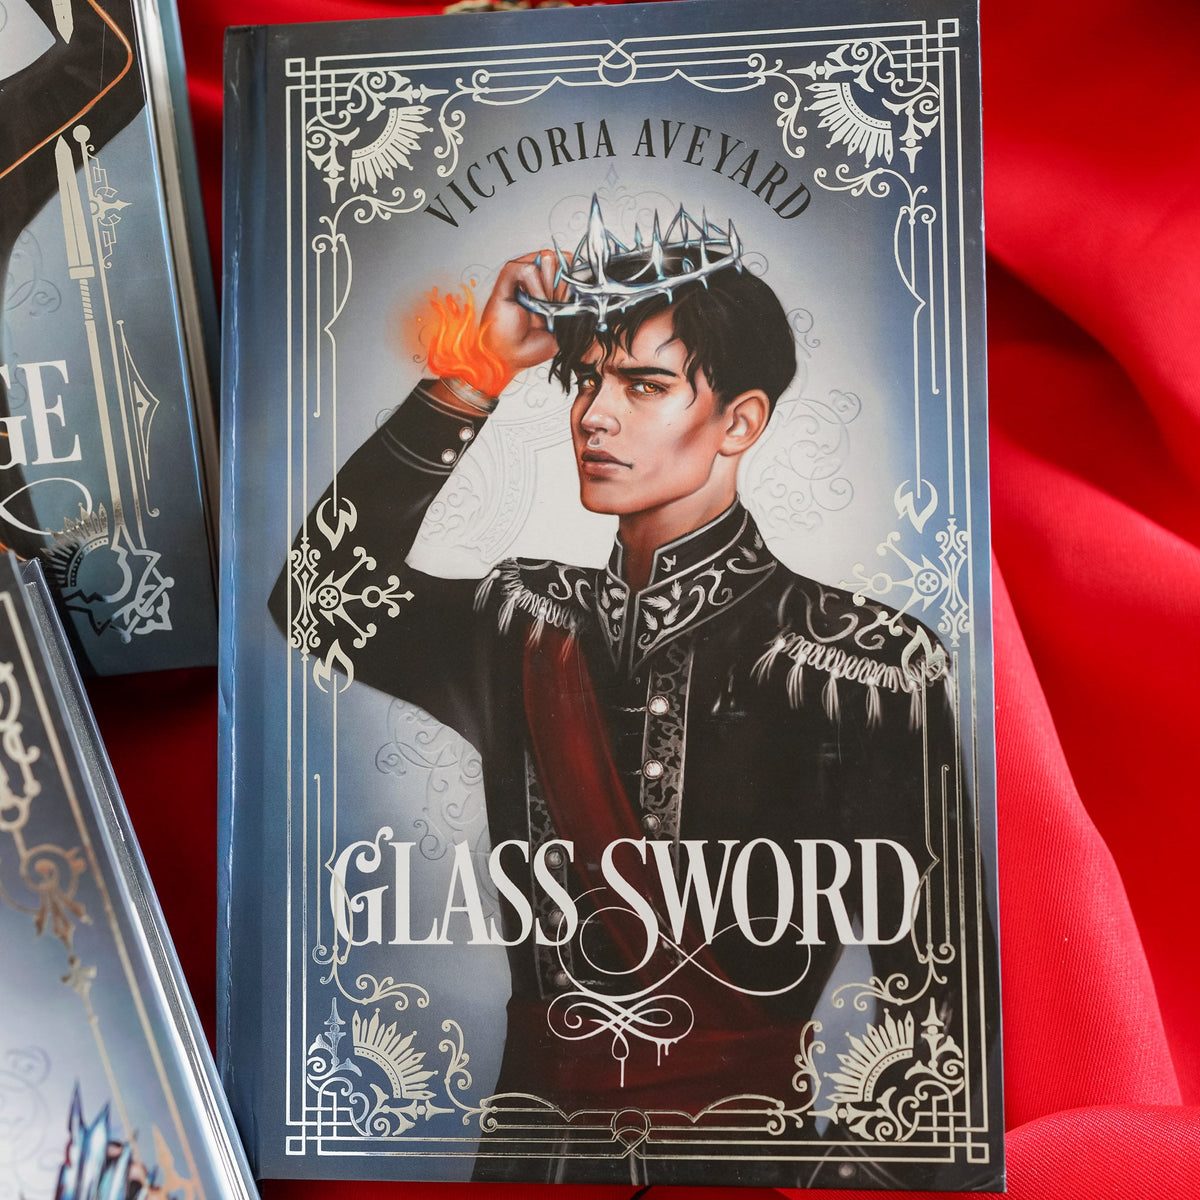 Glass Sword book 2 featuring Tiberias Calore VII with crown in his hand and flames coming from his fire-starter bracelet